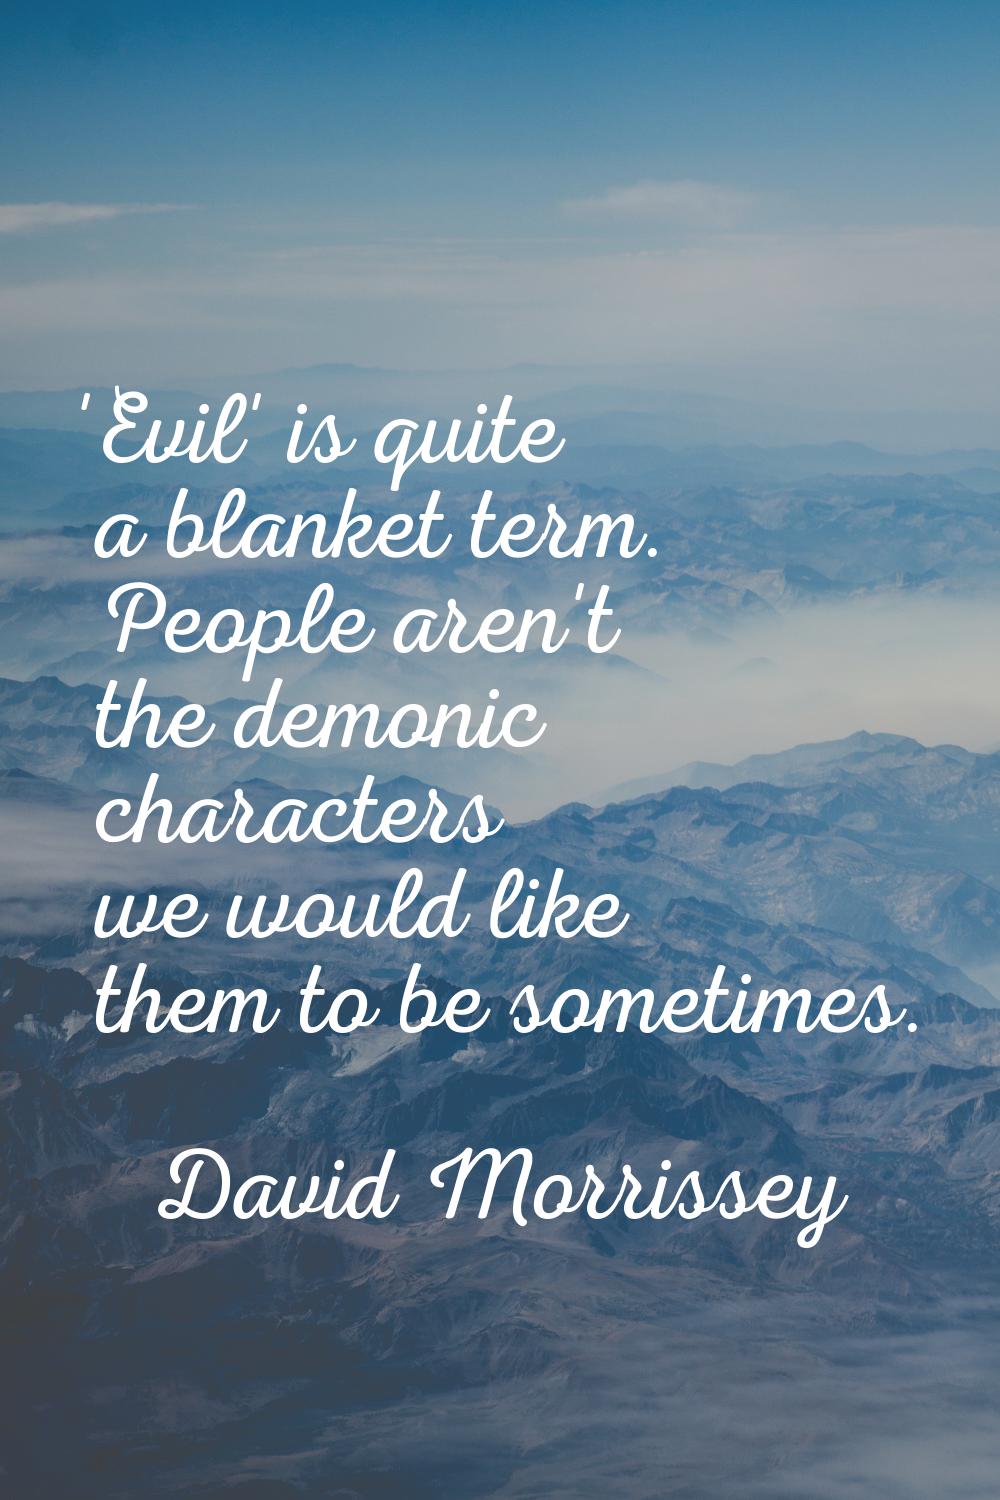 'Evil' is quite a blanket term. People aren't the demonic characters we would like them to be somet